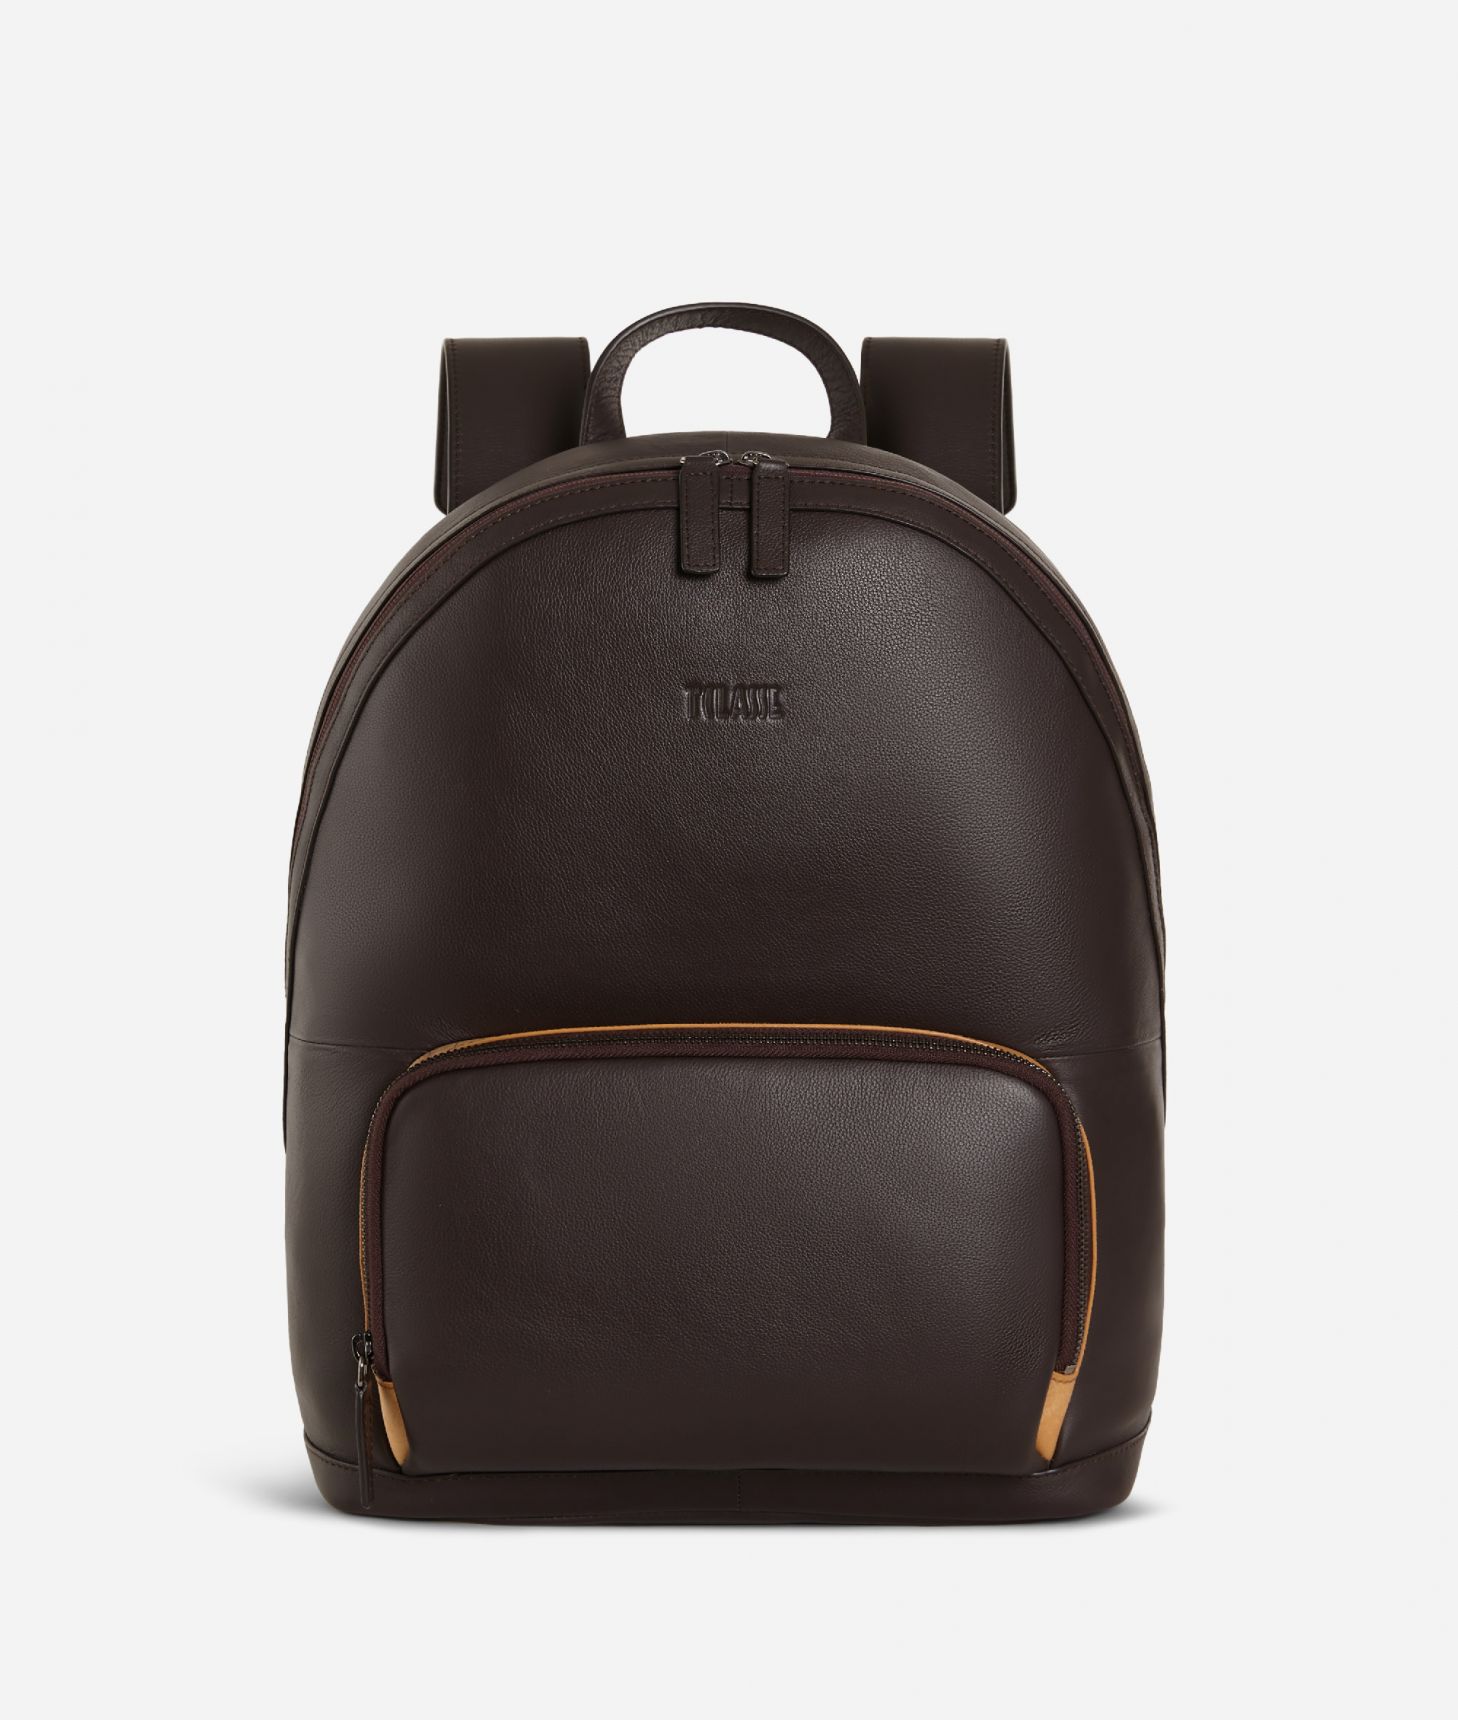 Backpack leather brown,front